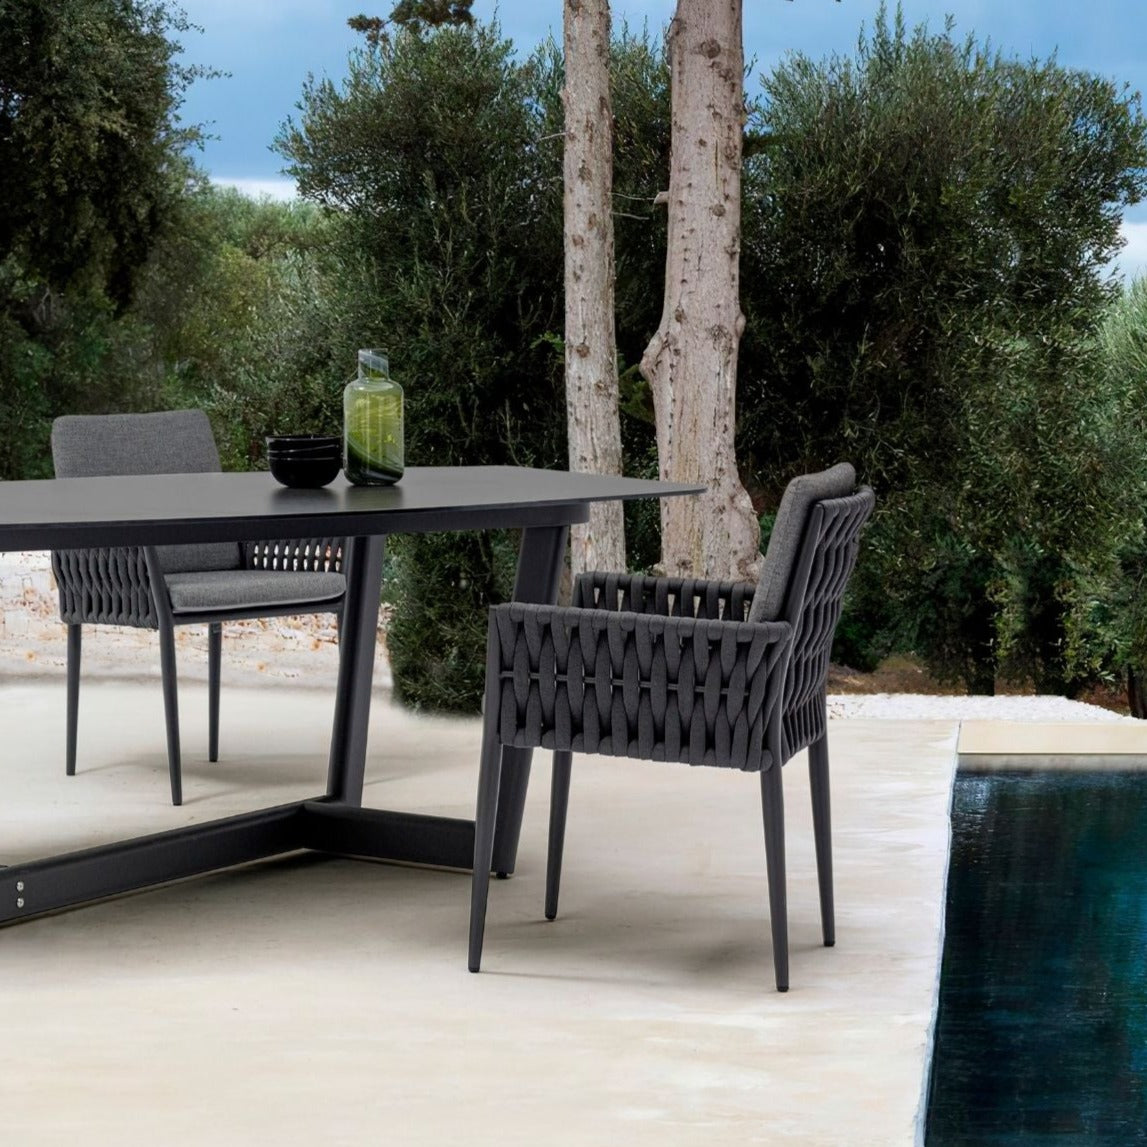 Hug Series | Outdoor Square Dining Table - The Feelter